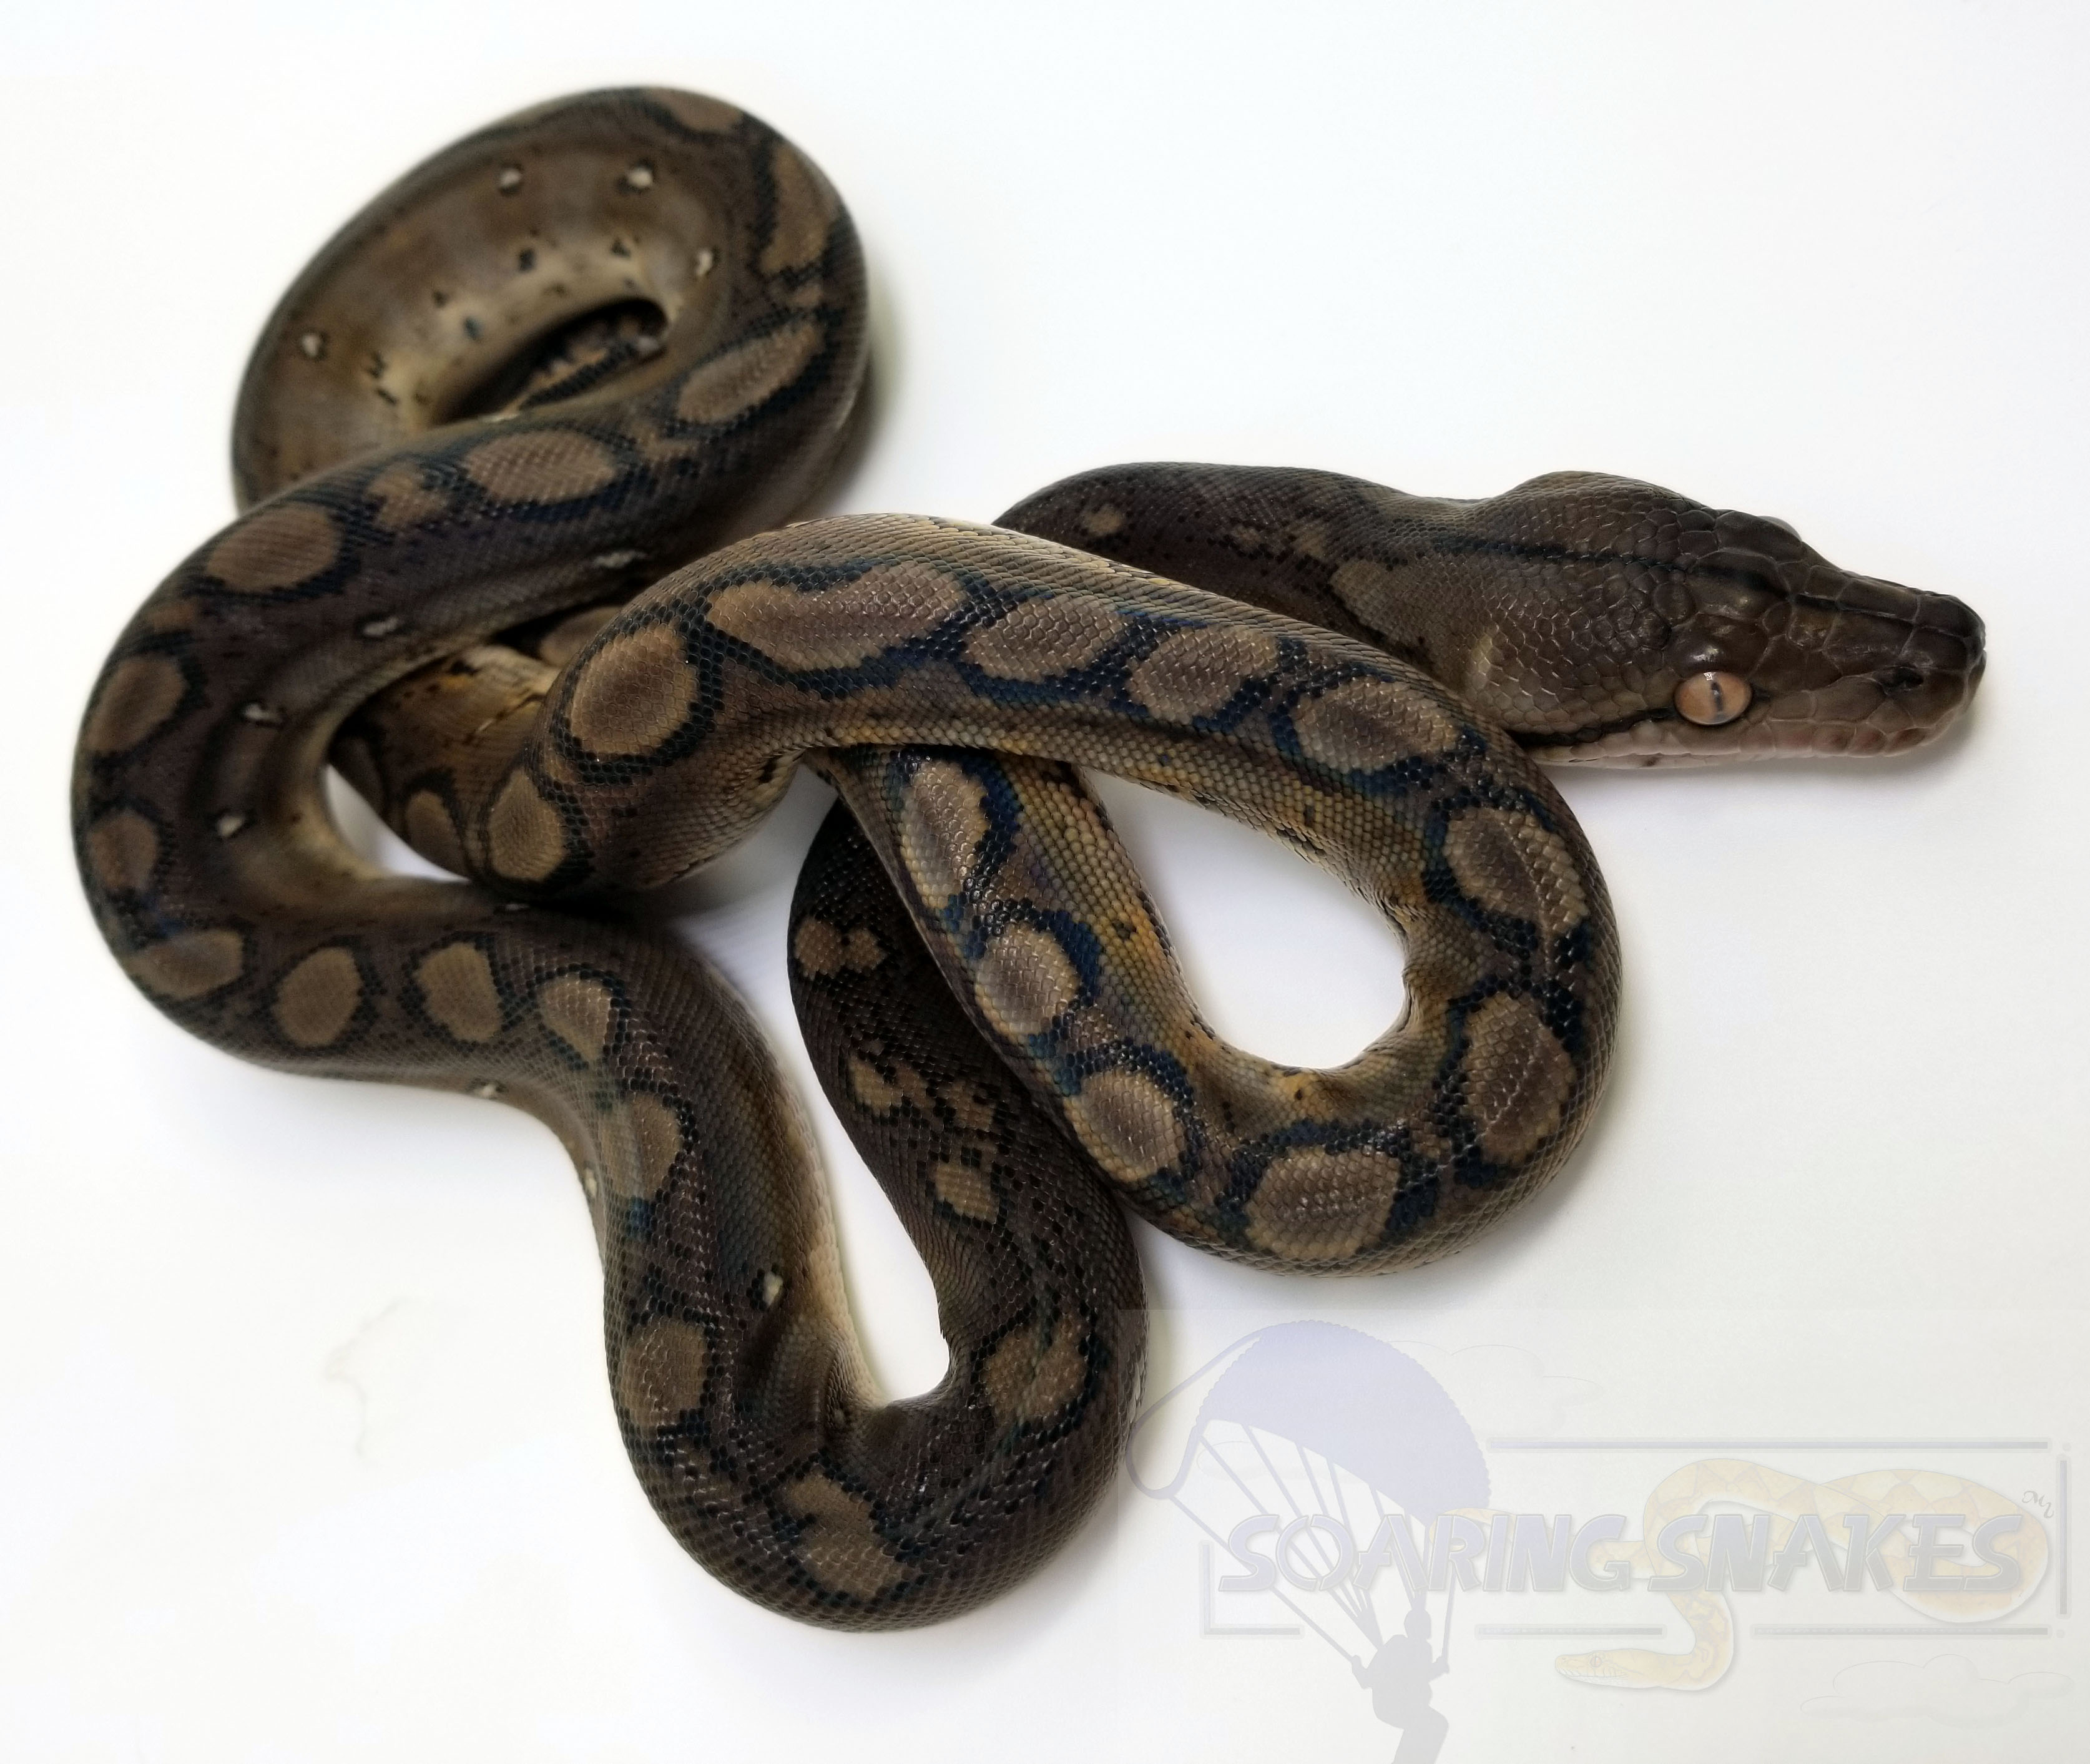 Motley Reticulated Python by Soaring Snakes